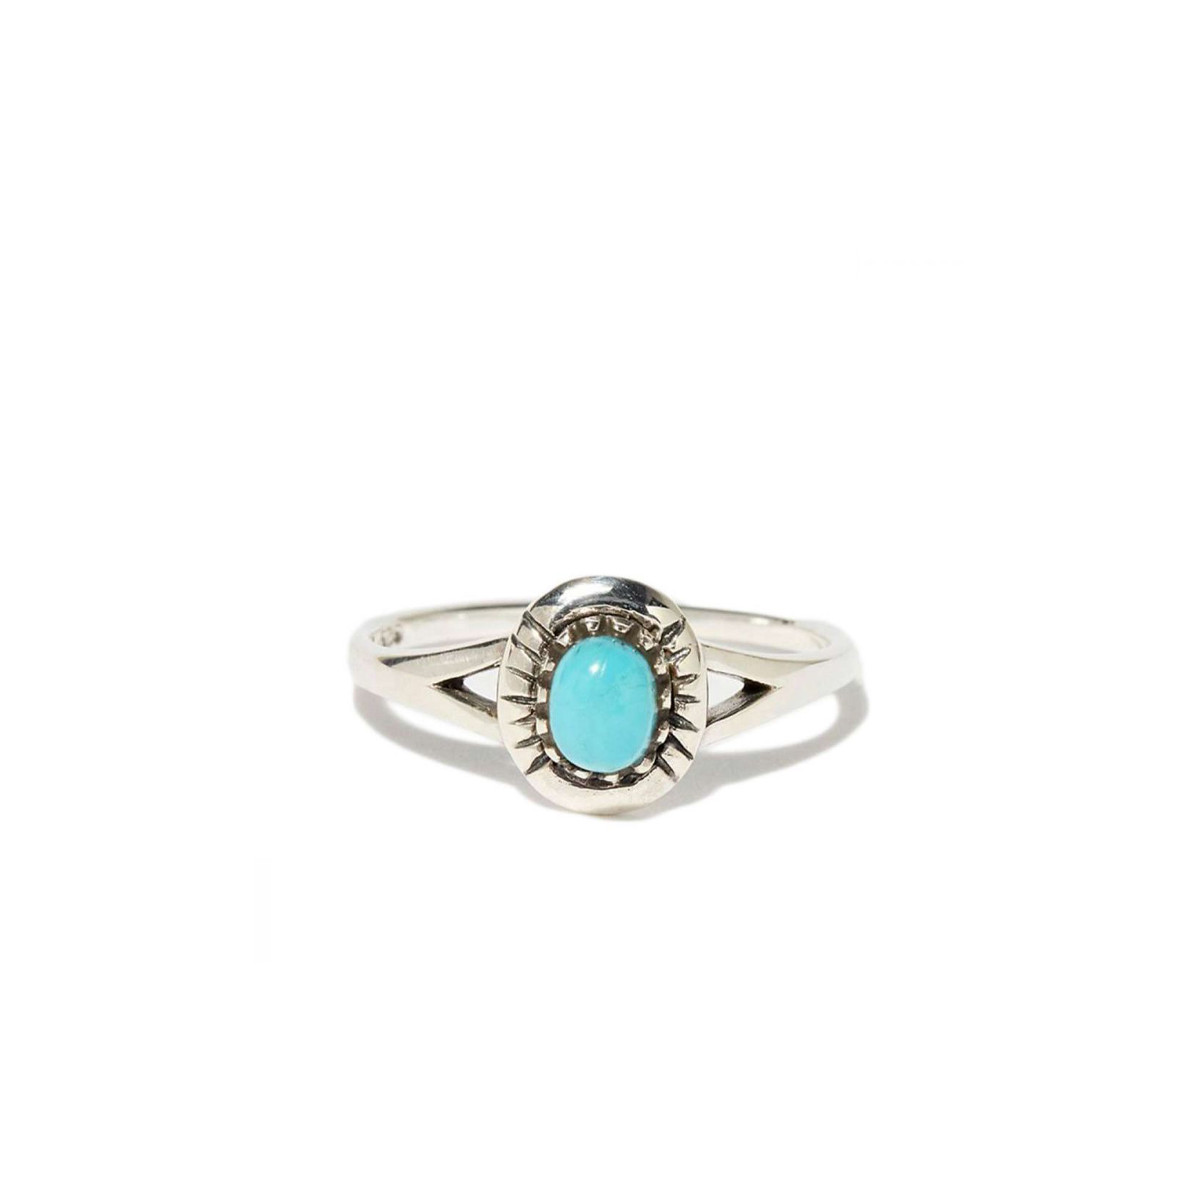 Bague "Aitor Turquoise" Argent 925